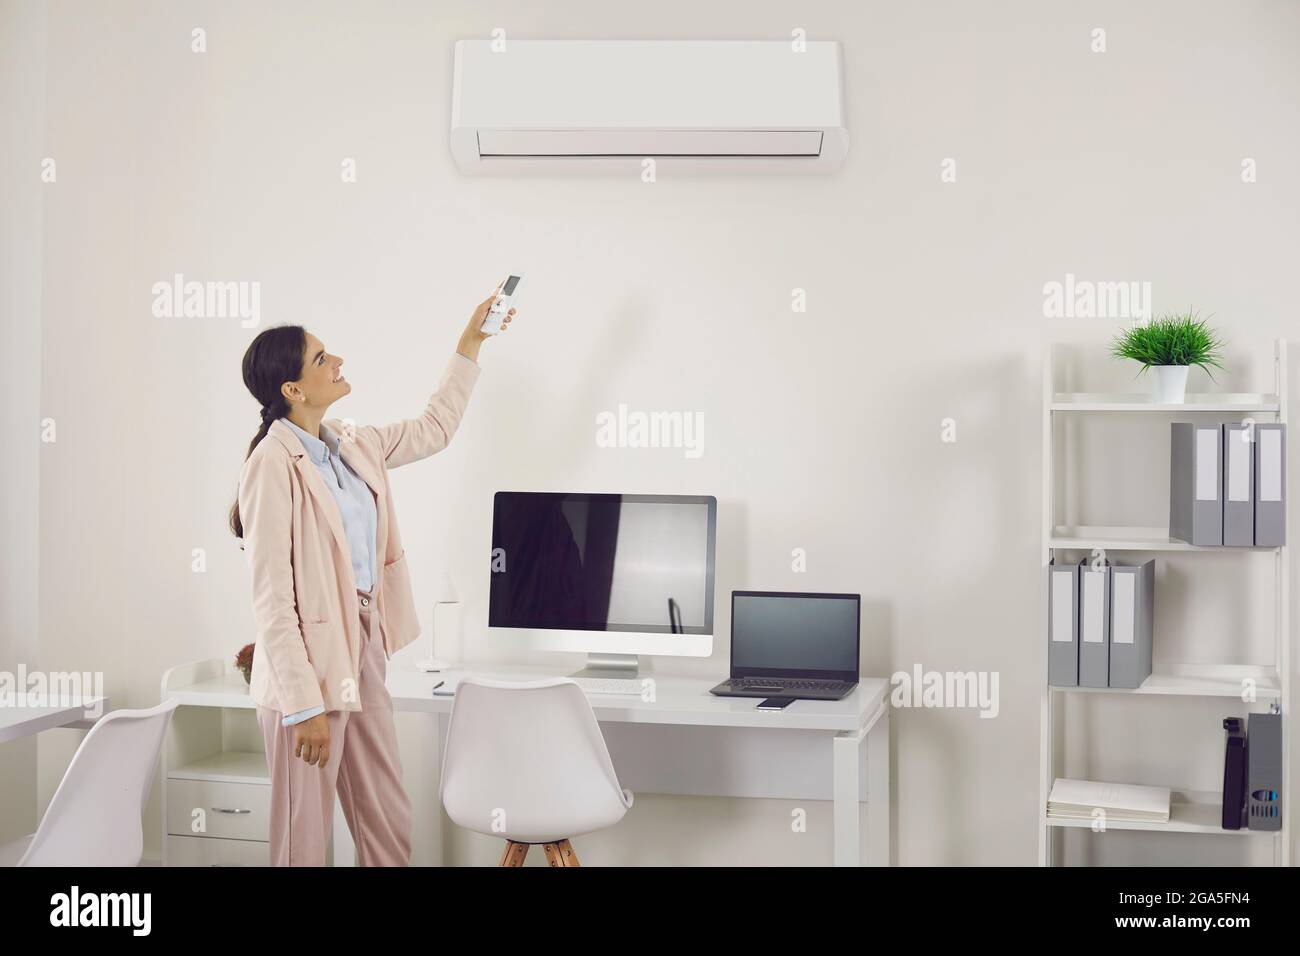 Woman using remote control to switch wall air conditioner in modern office workplace Stock Photo